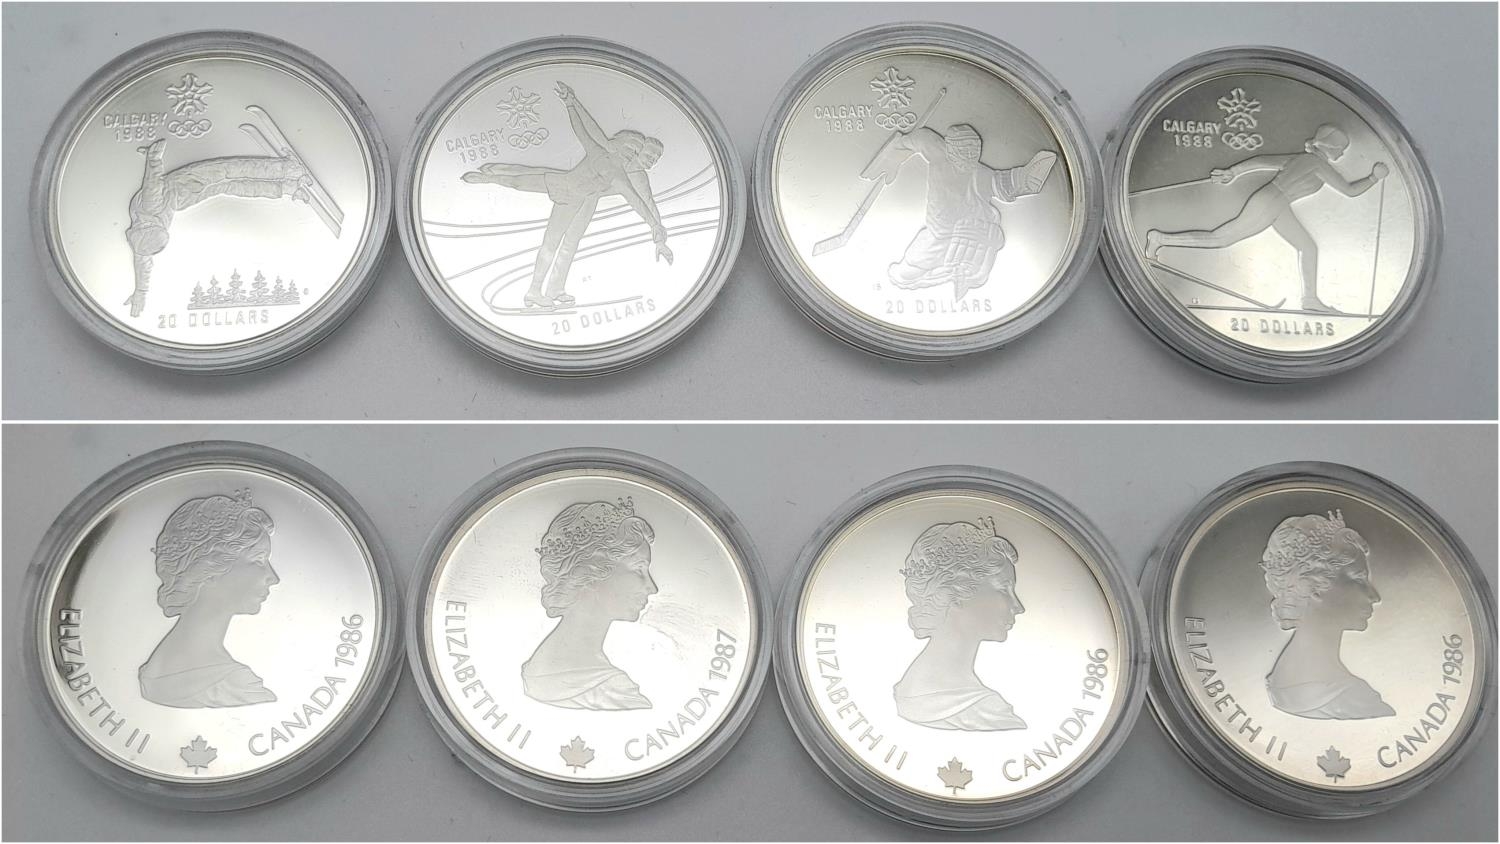 Four Commemorative 925 Silver Coins - Celebrating the 1986 Canadian Winter Games. Each coin weighs 1